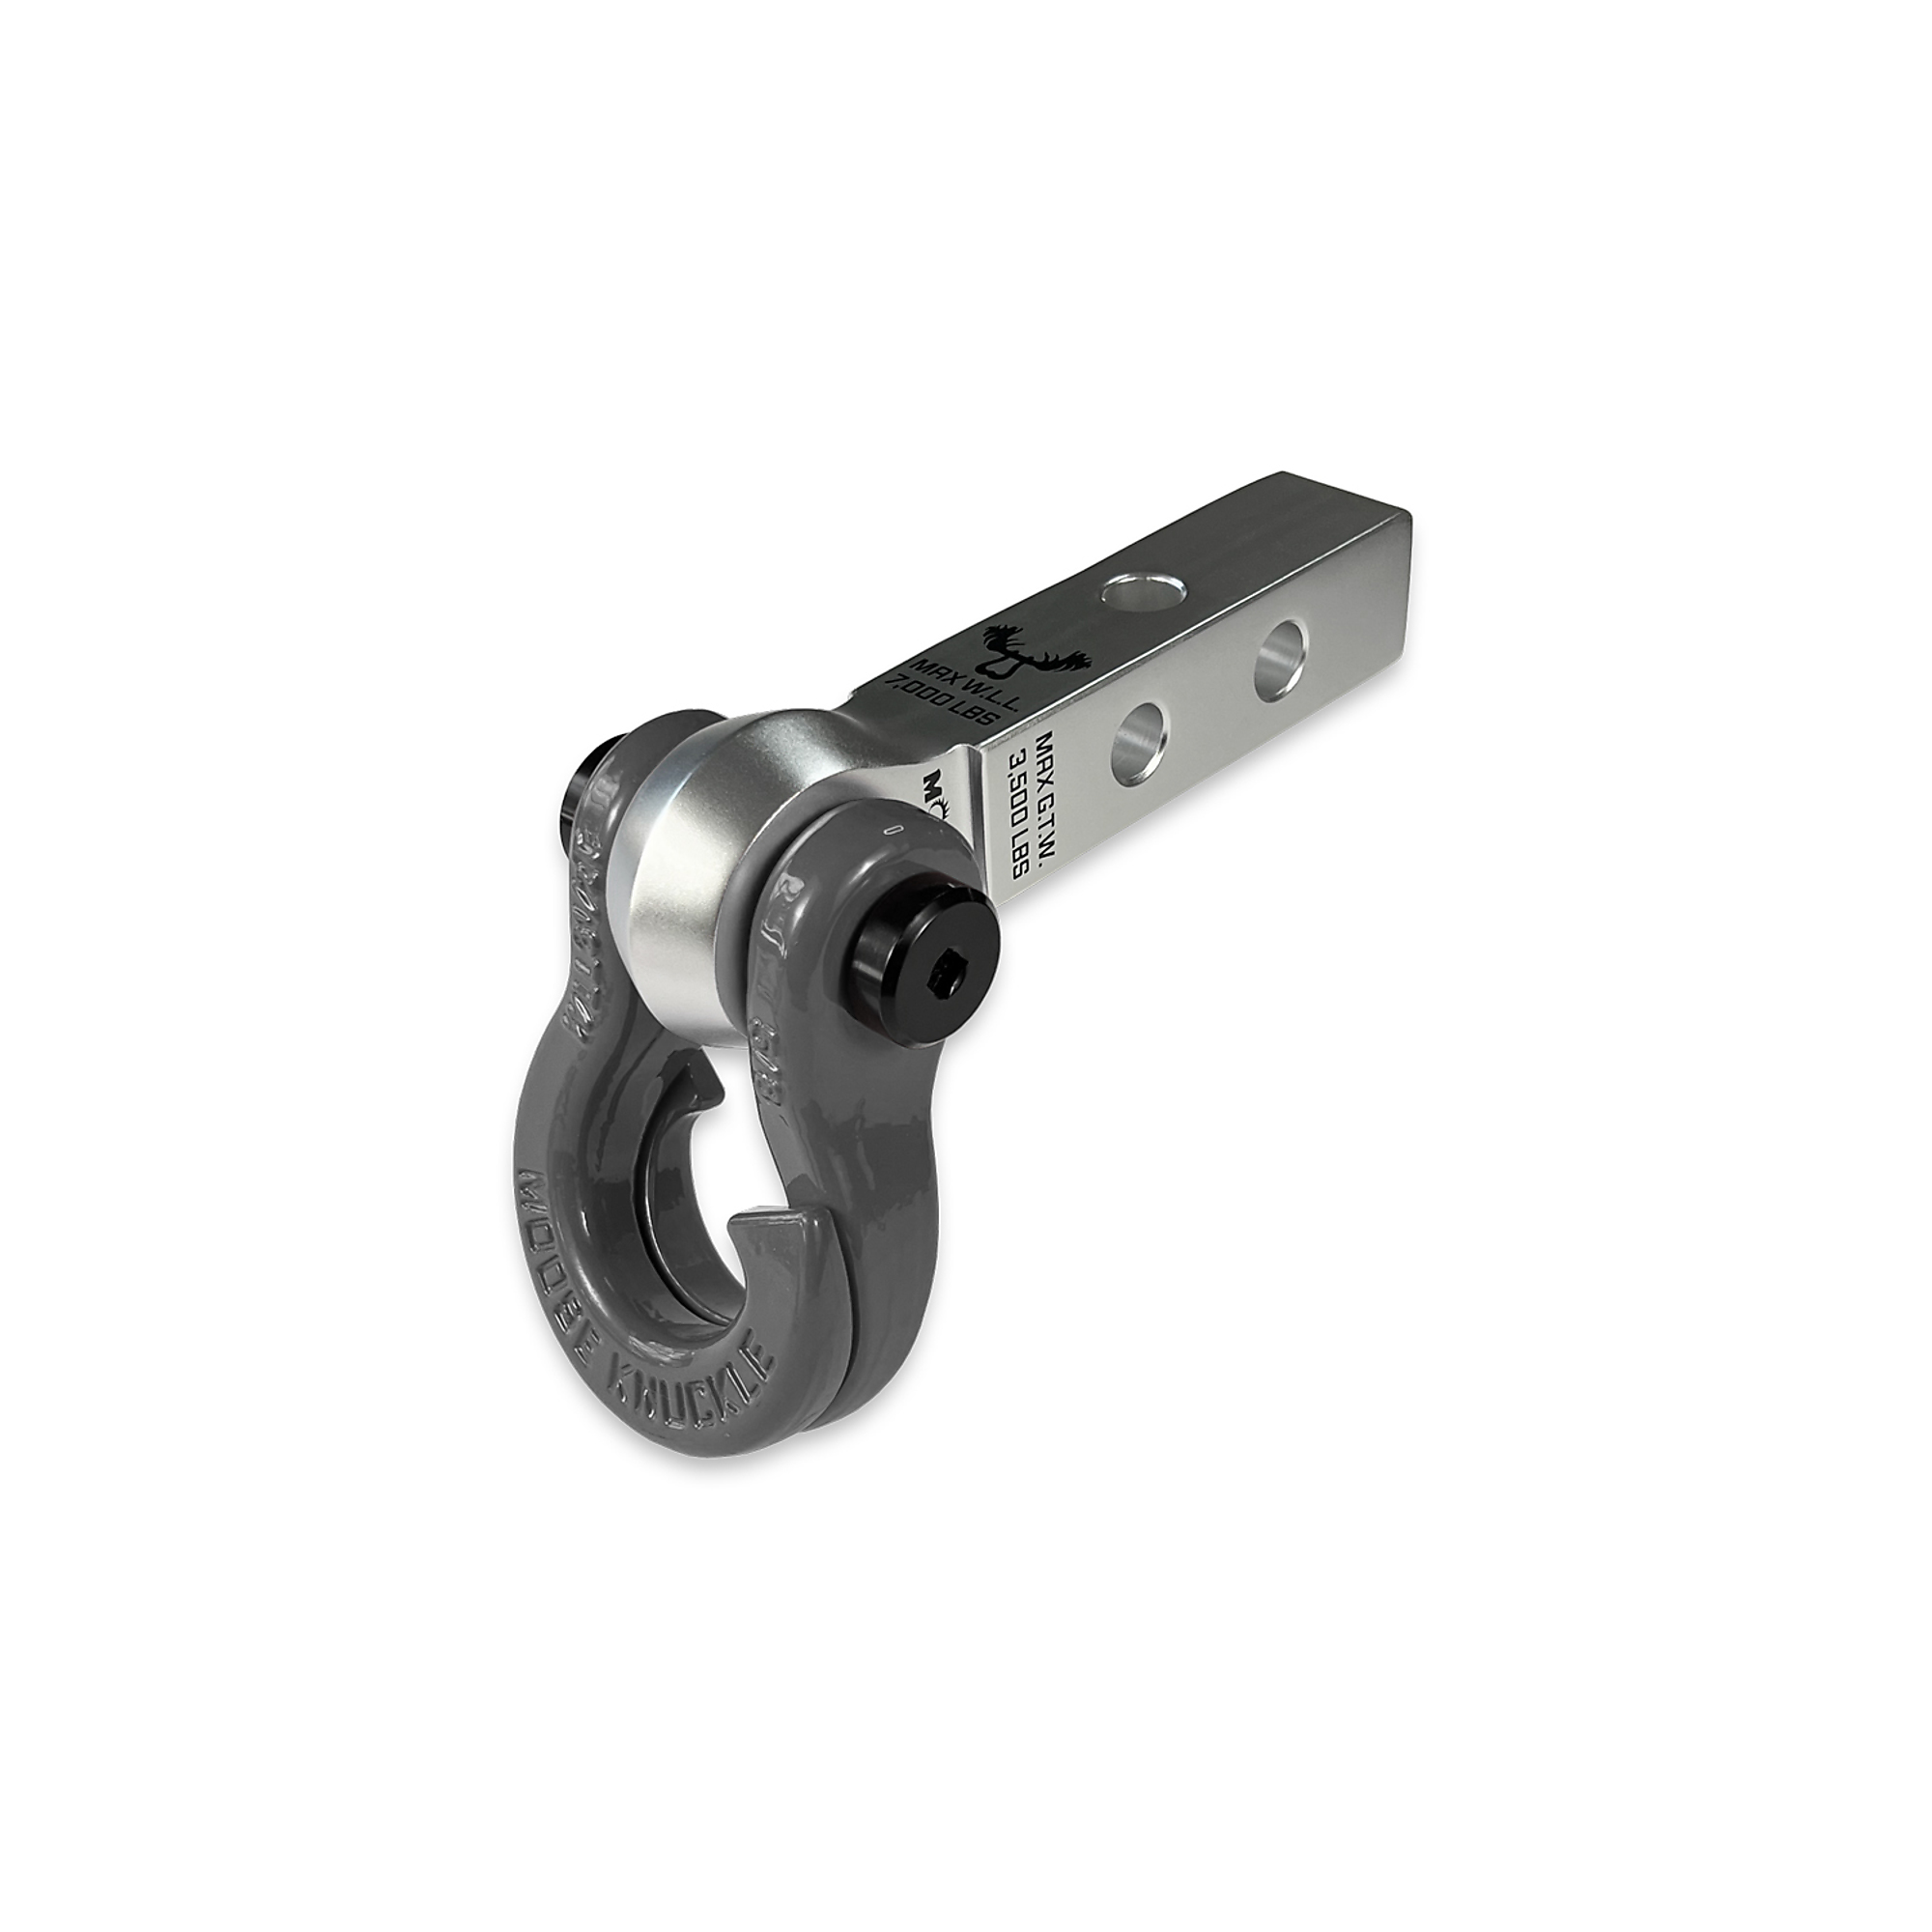 Moose Knuckle Offroad, 5/8 Jowl Split Shackle and Mohawk 1.25 Receiver Combo, Gross Towing Weight 3500 lb, Class Rating Class II, Model FN000043-010